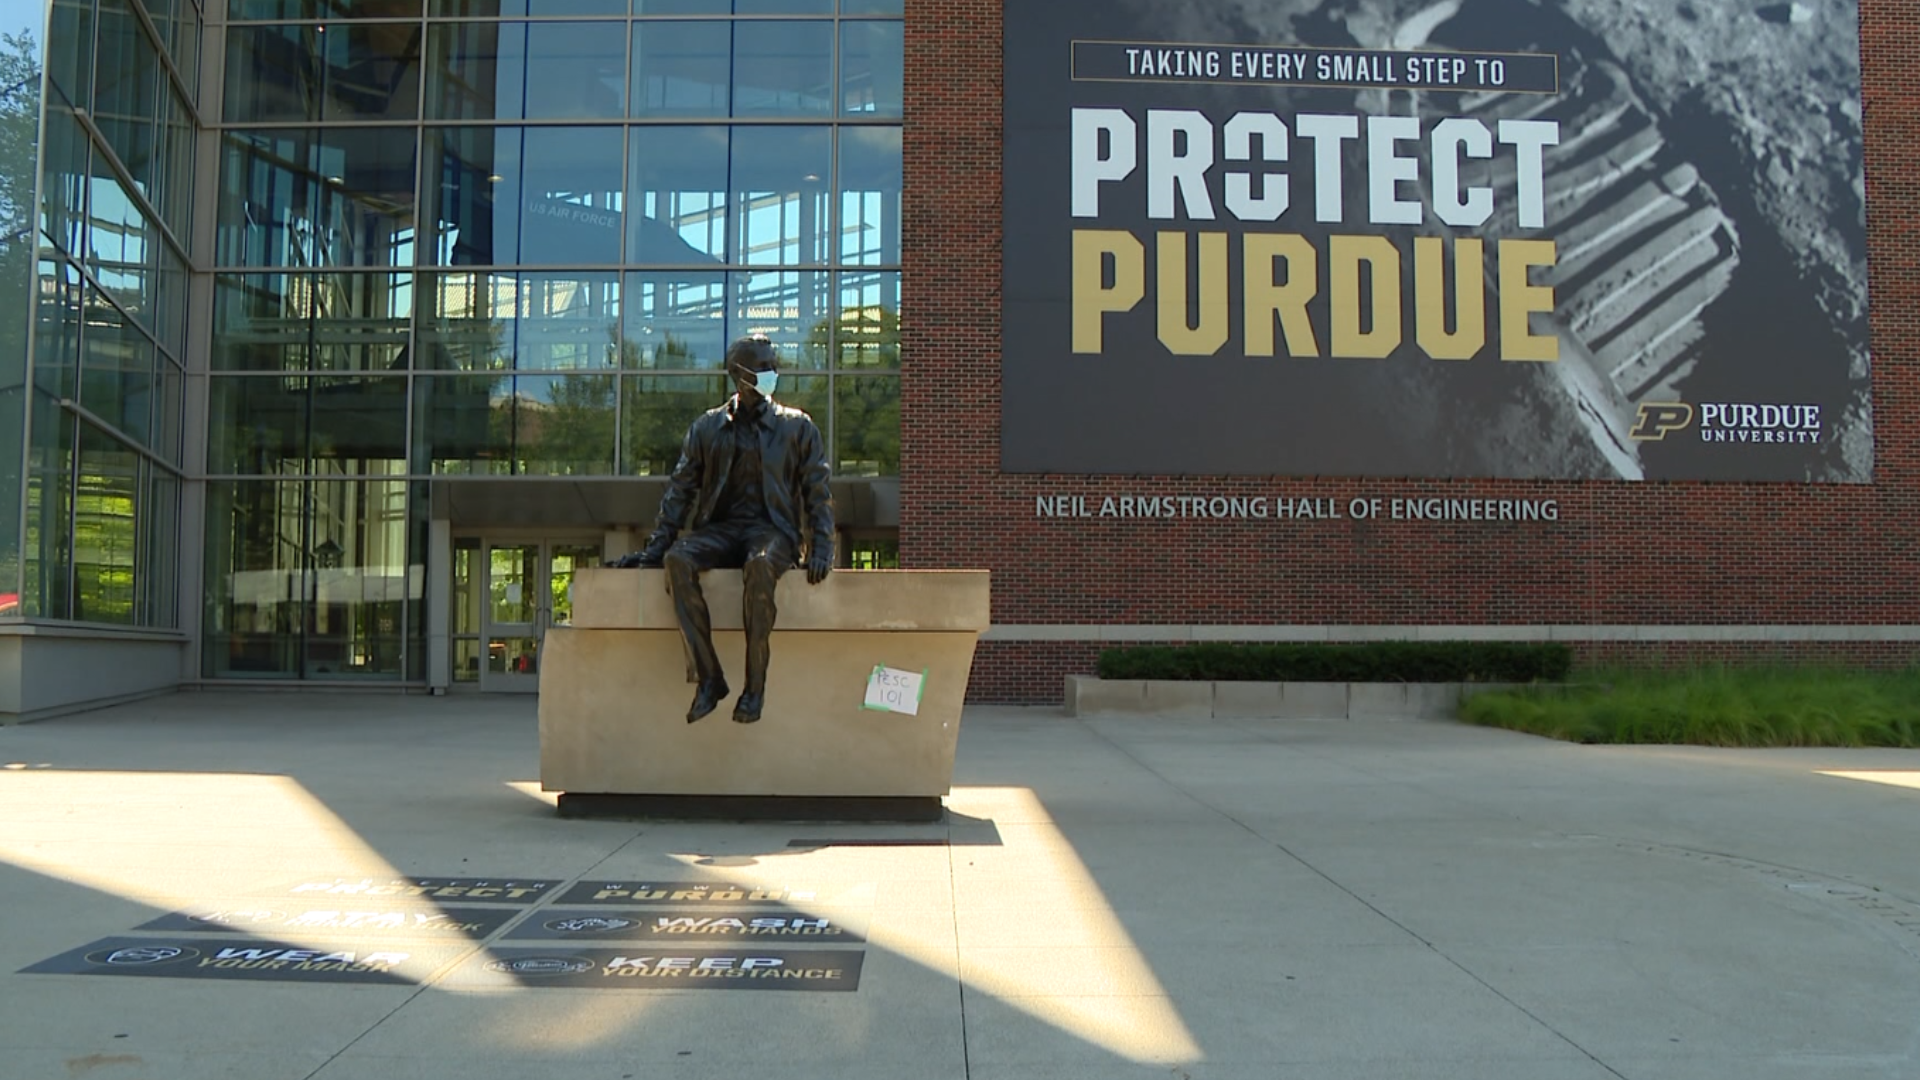 A majority of Purdue students are in compliance with the Protect Purdue guidelines.